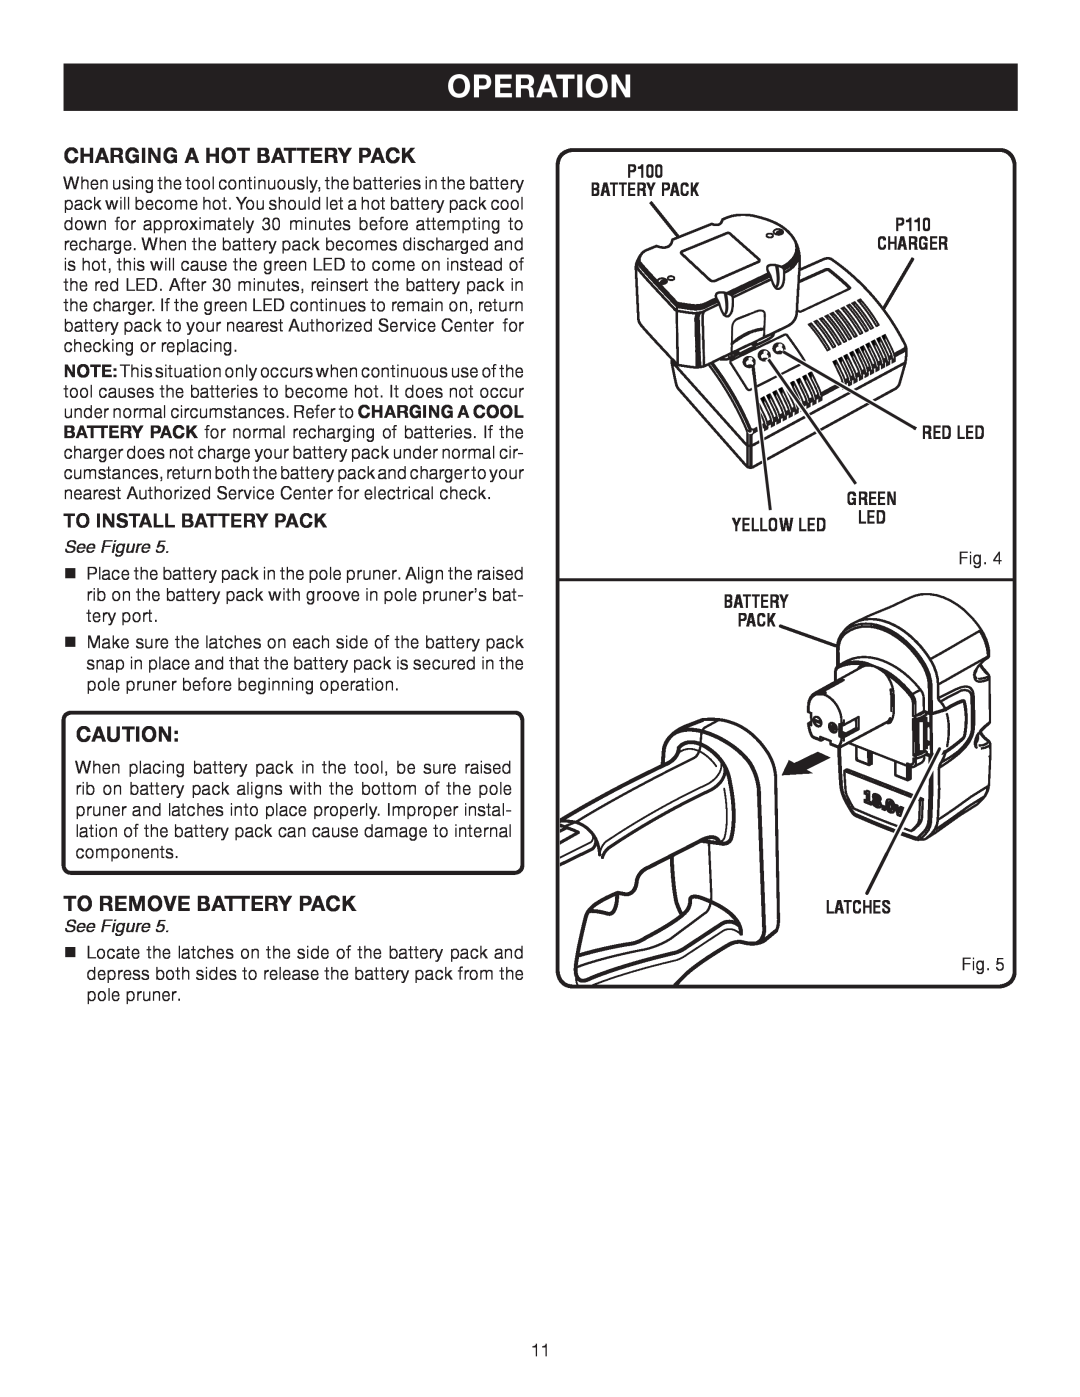 Ryobi P2500 manual Charging A Hot Battery Pack, To Remove Battery Pack, Operation, To Install Battery Pack, See Figure 